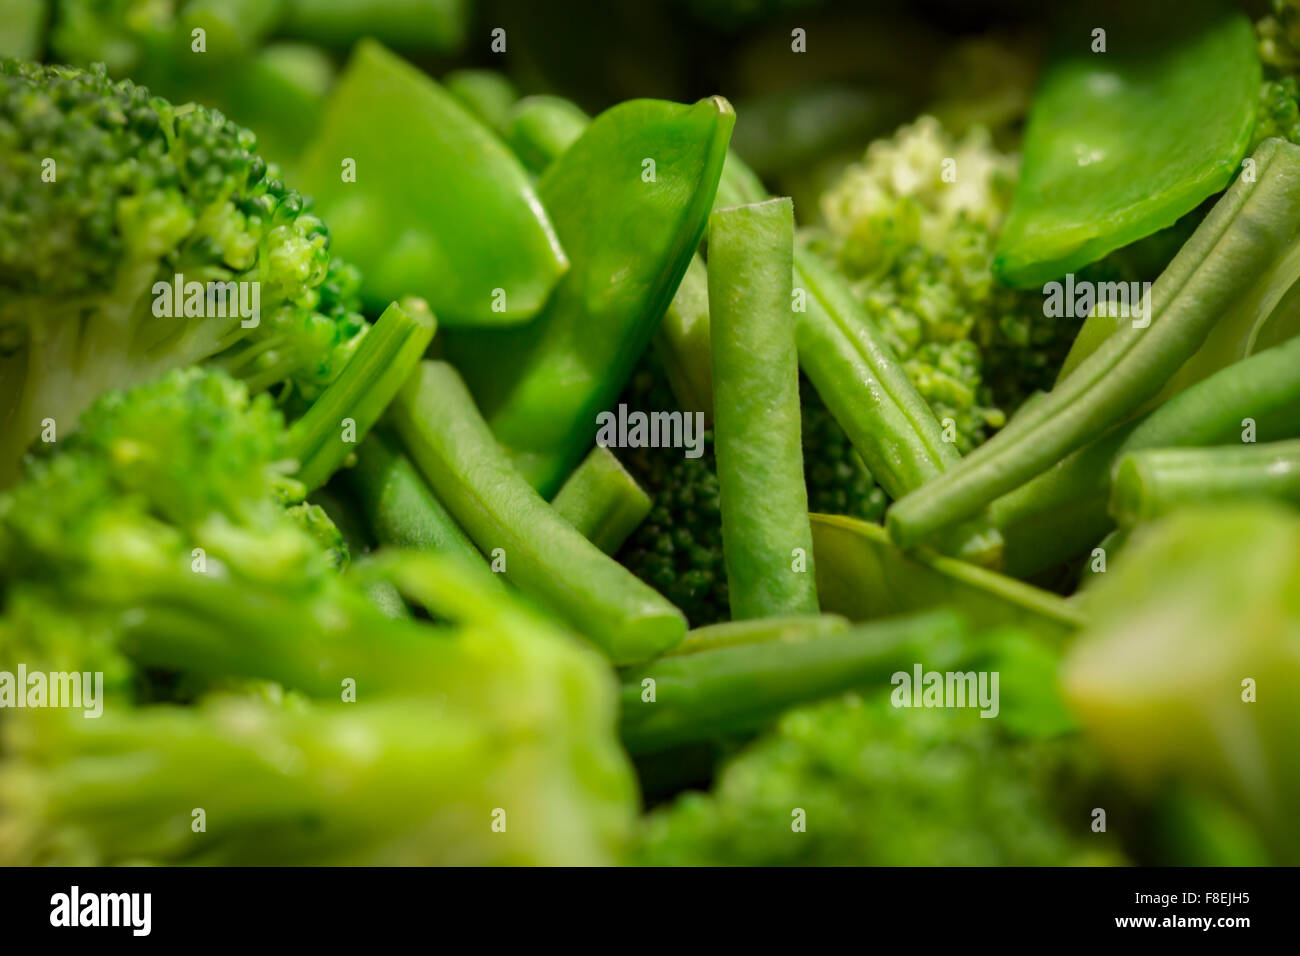 Detail view of Broccoli Beans and snow peas Stock Photo